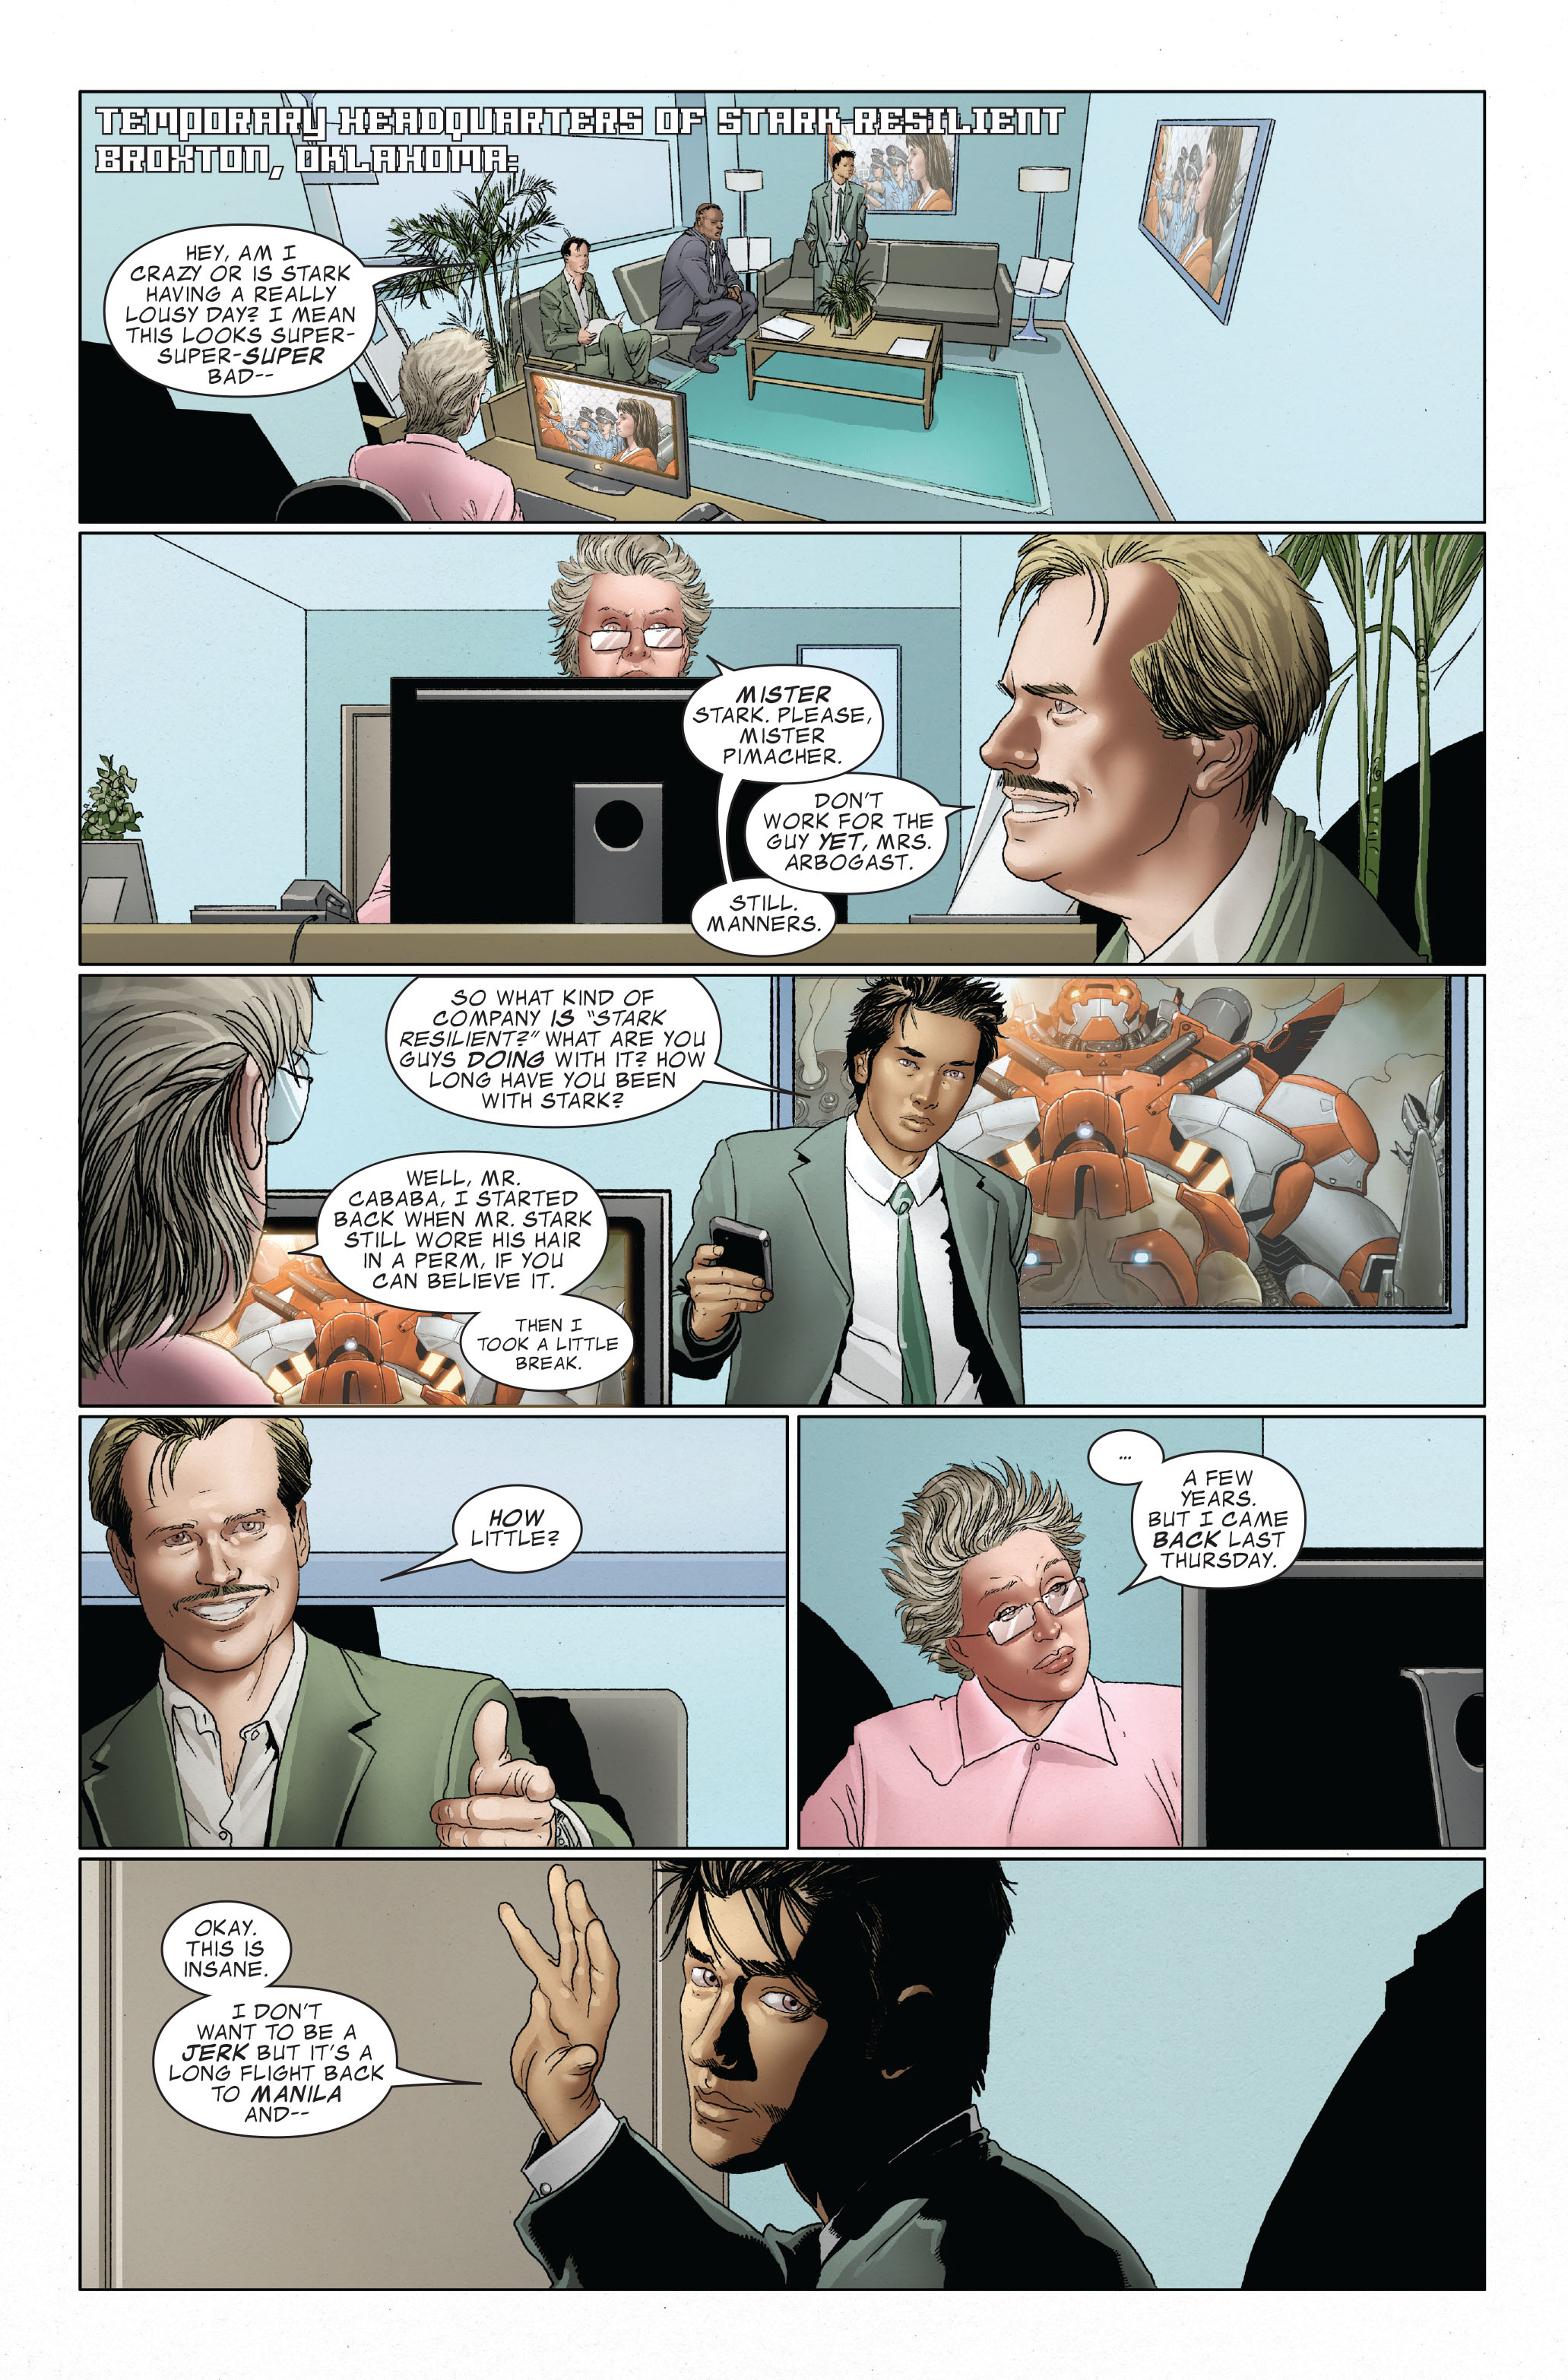 Invincible Iron Man (2008) 28 Page 10